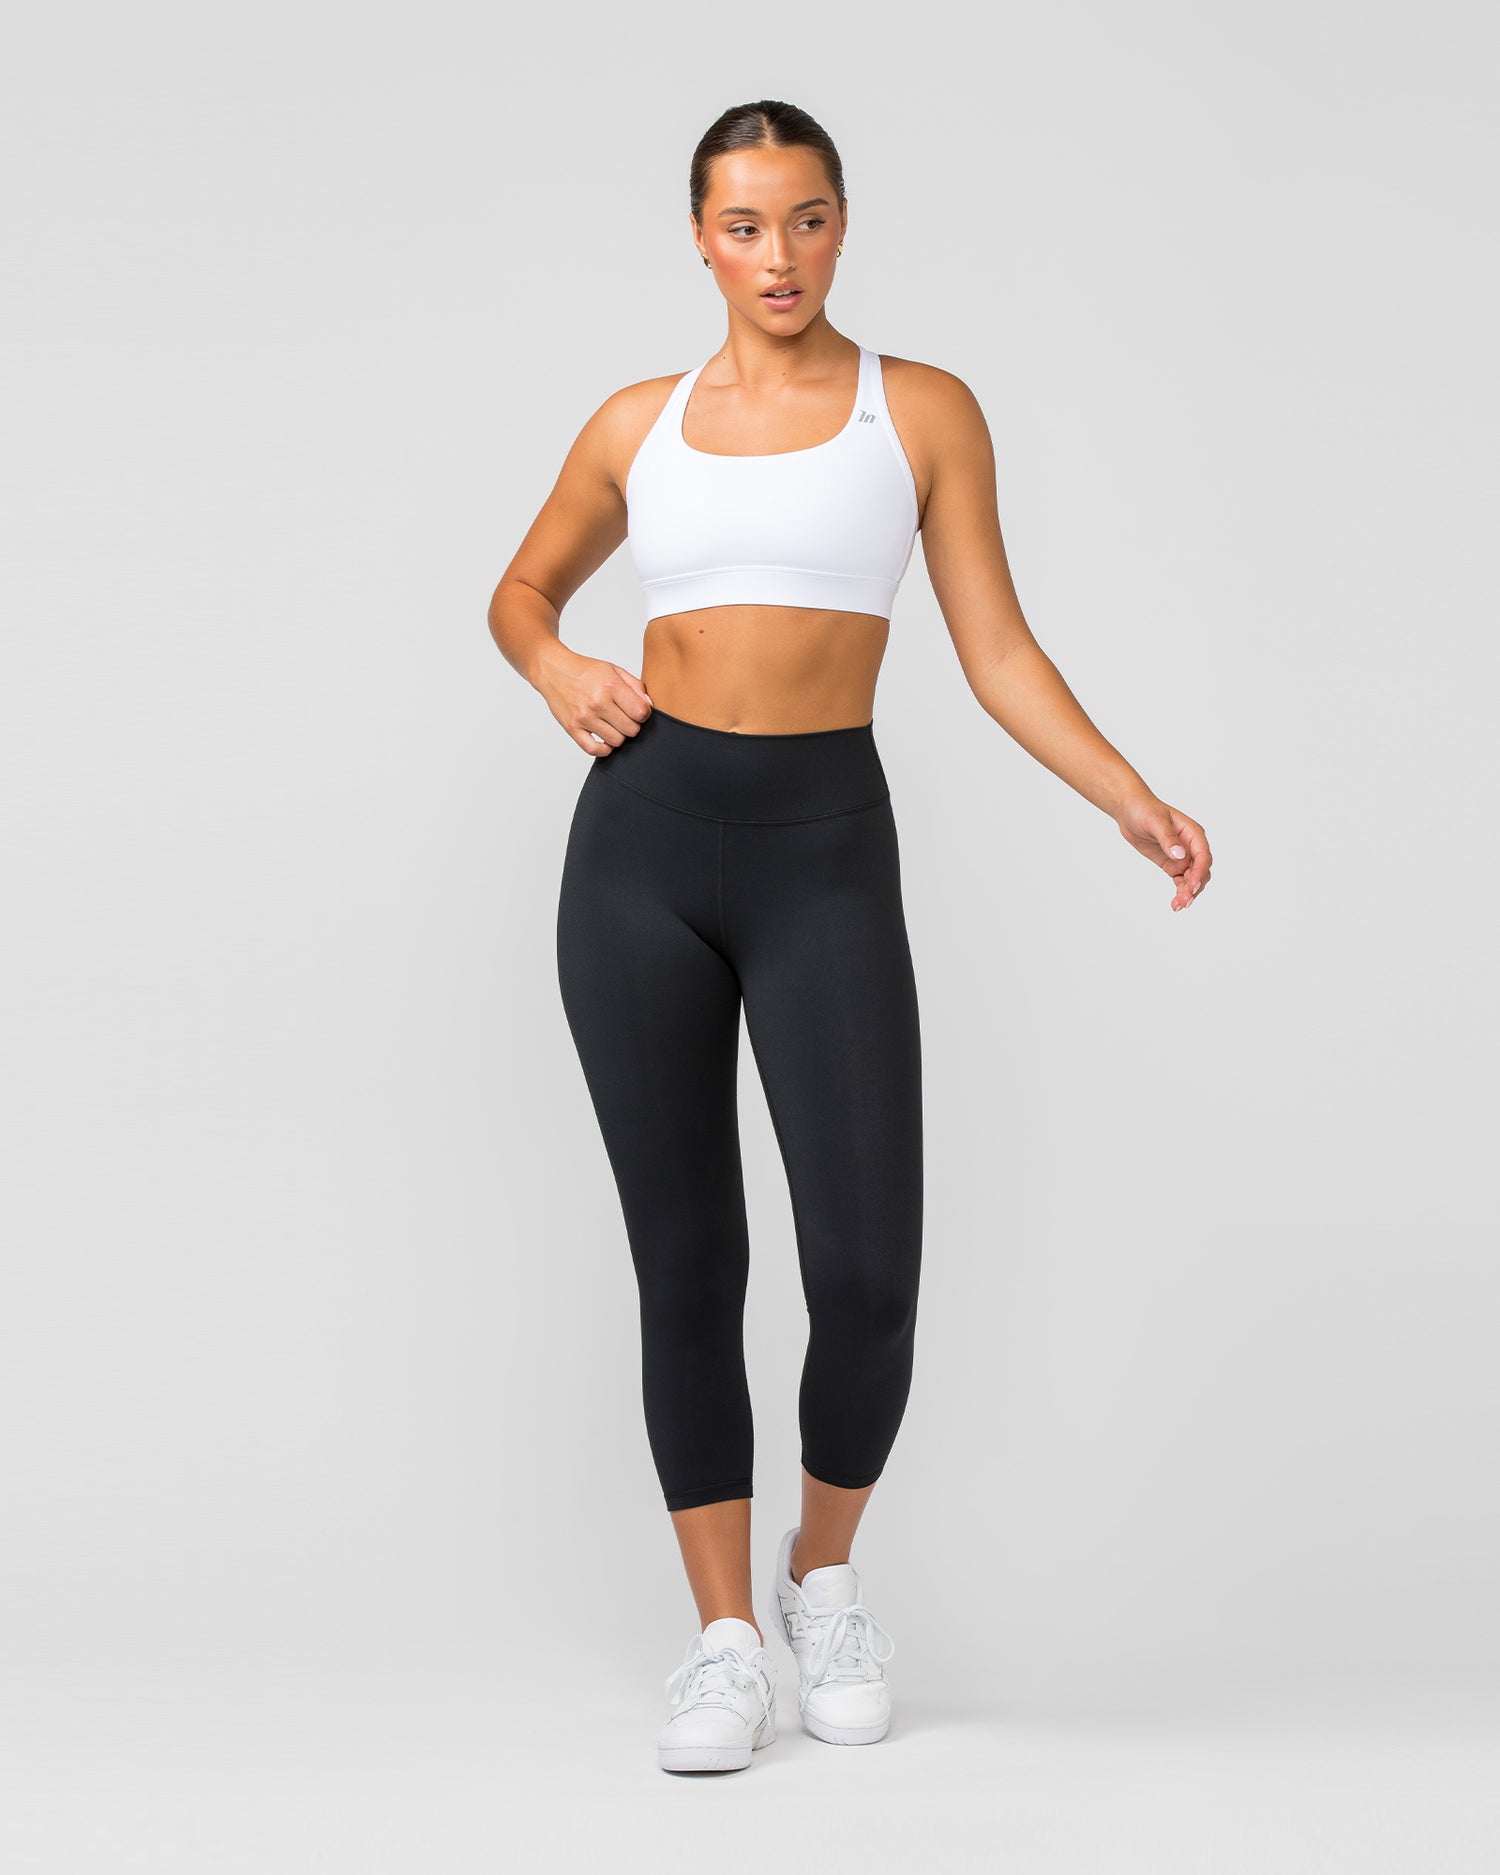 Your perfect black leggings with Muscle Nation